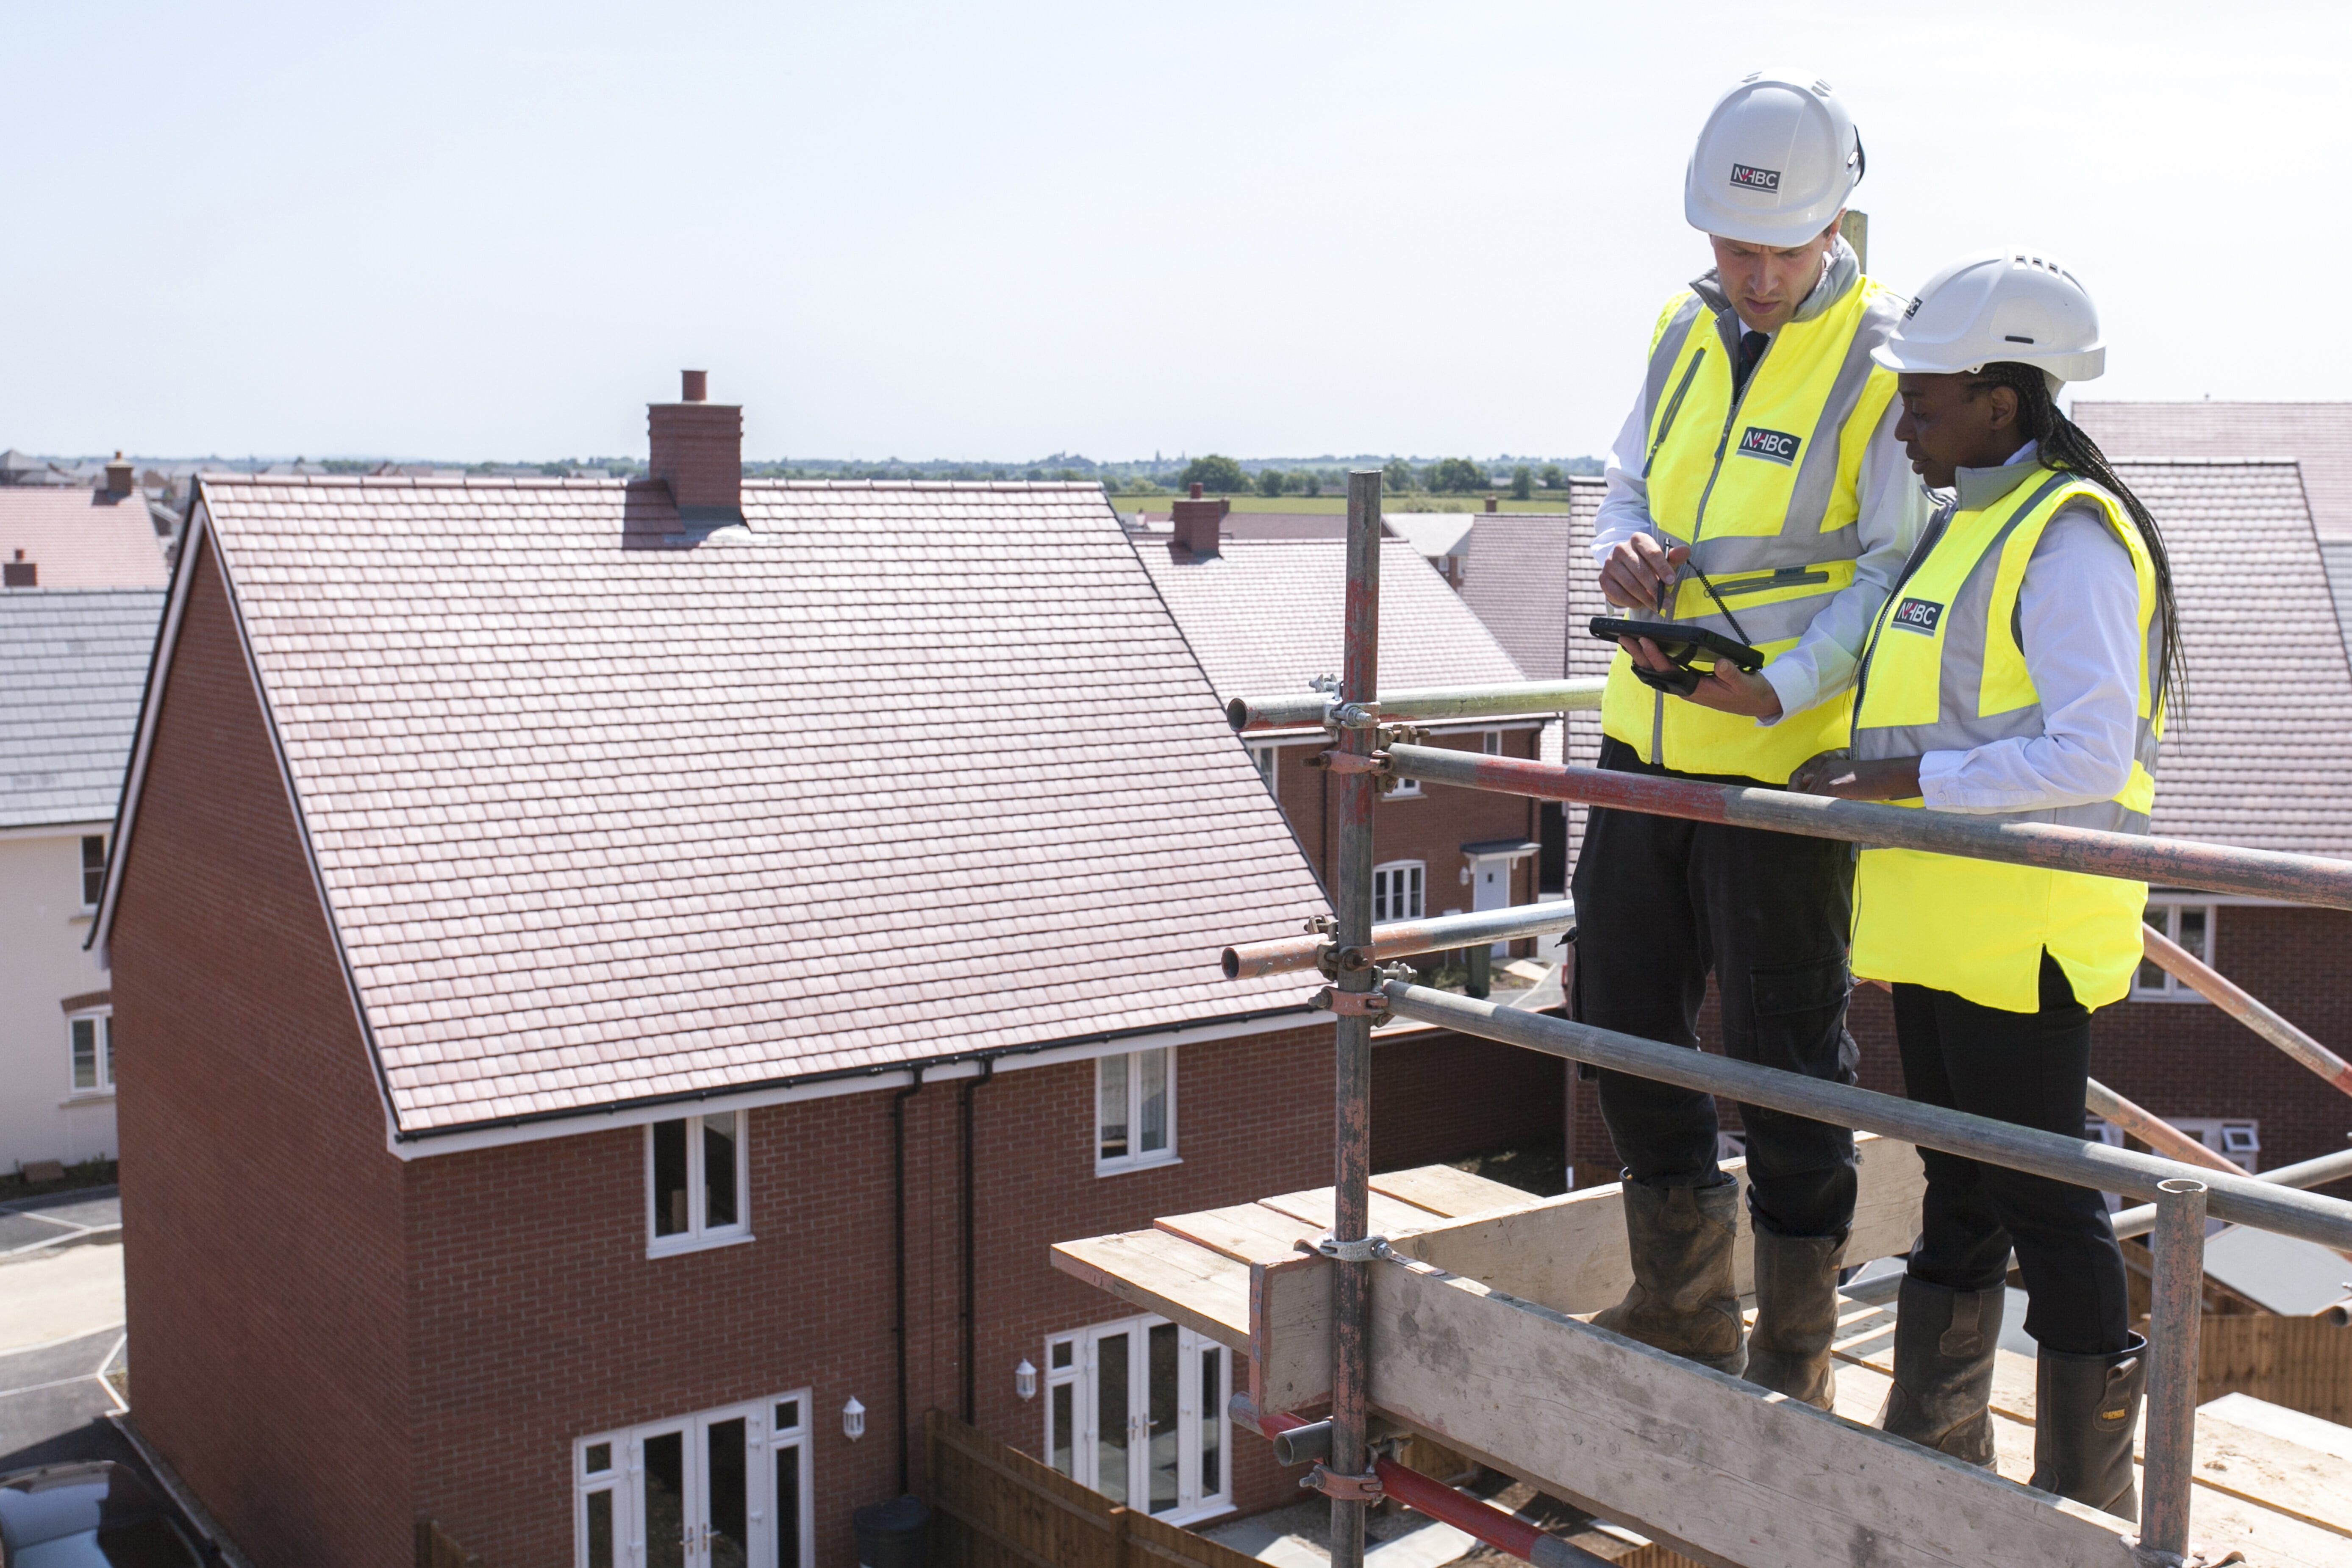 NHBC: New home completions return to pre-pandemic levels